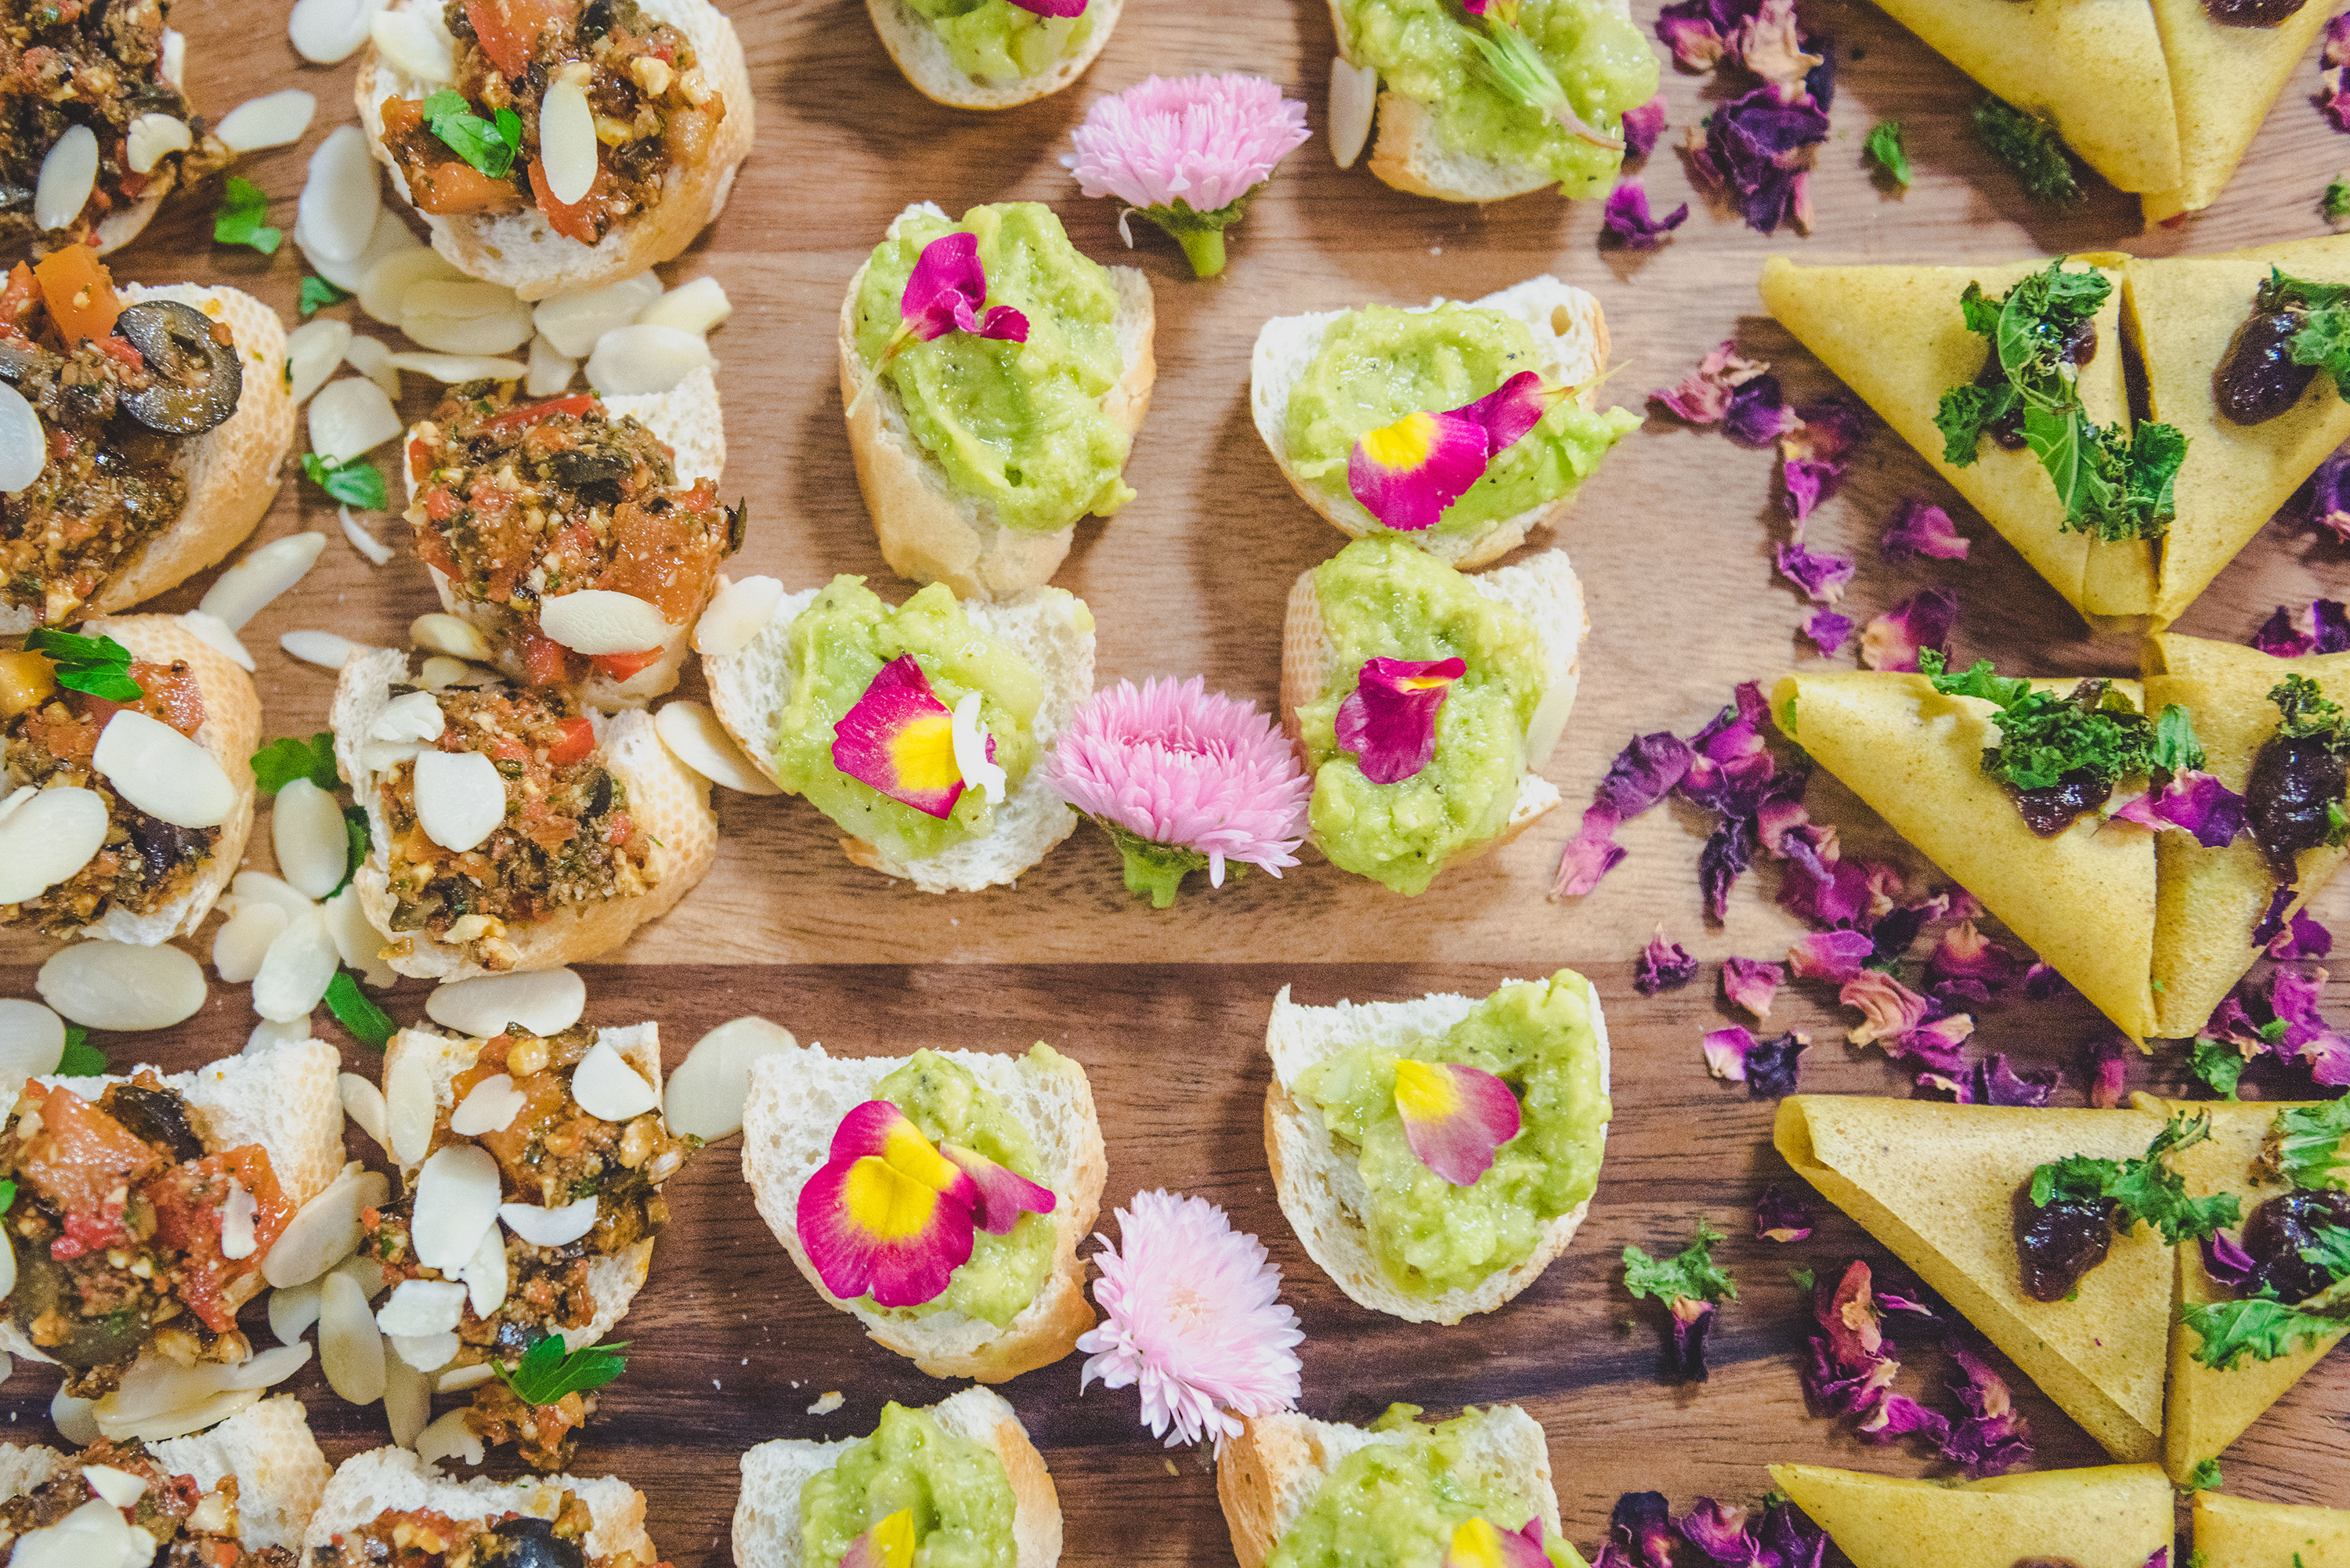 Vegan canapes from Nature.London